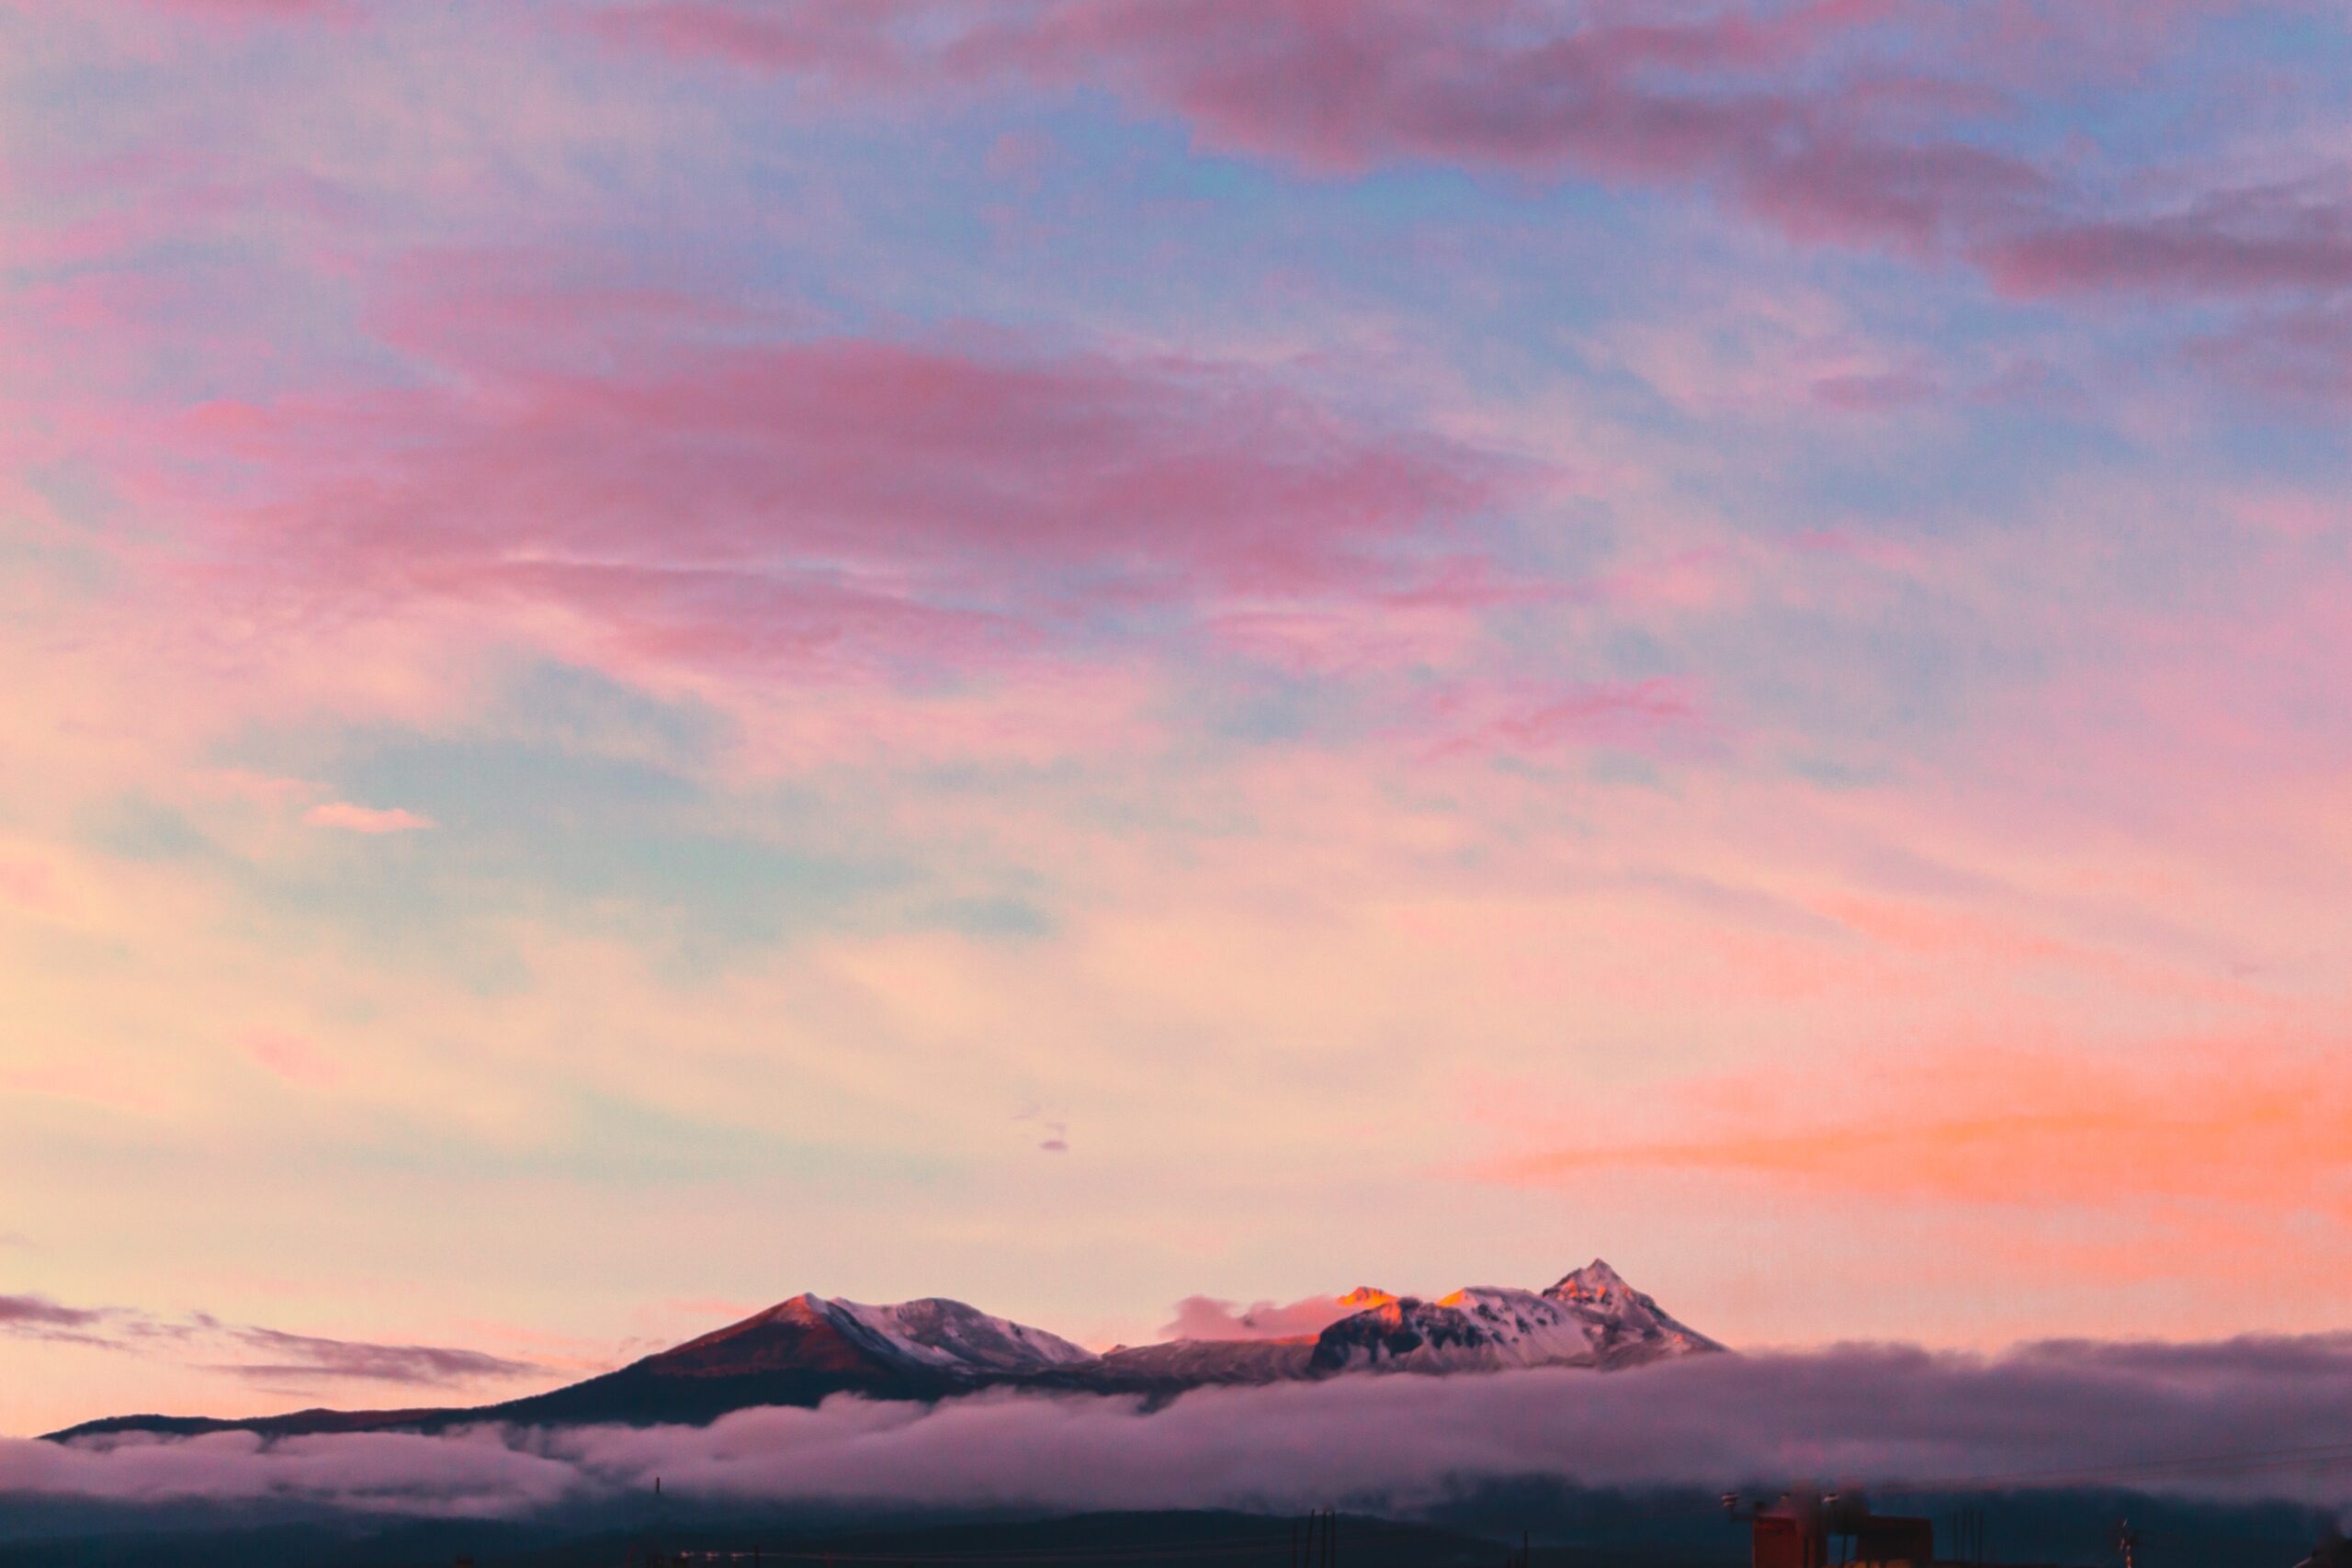 A sunset sky with snowy mountains on the horizon.